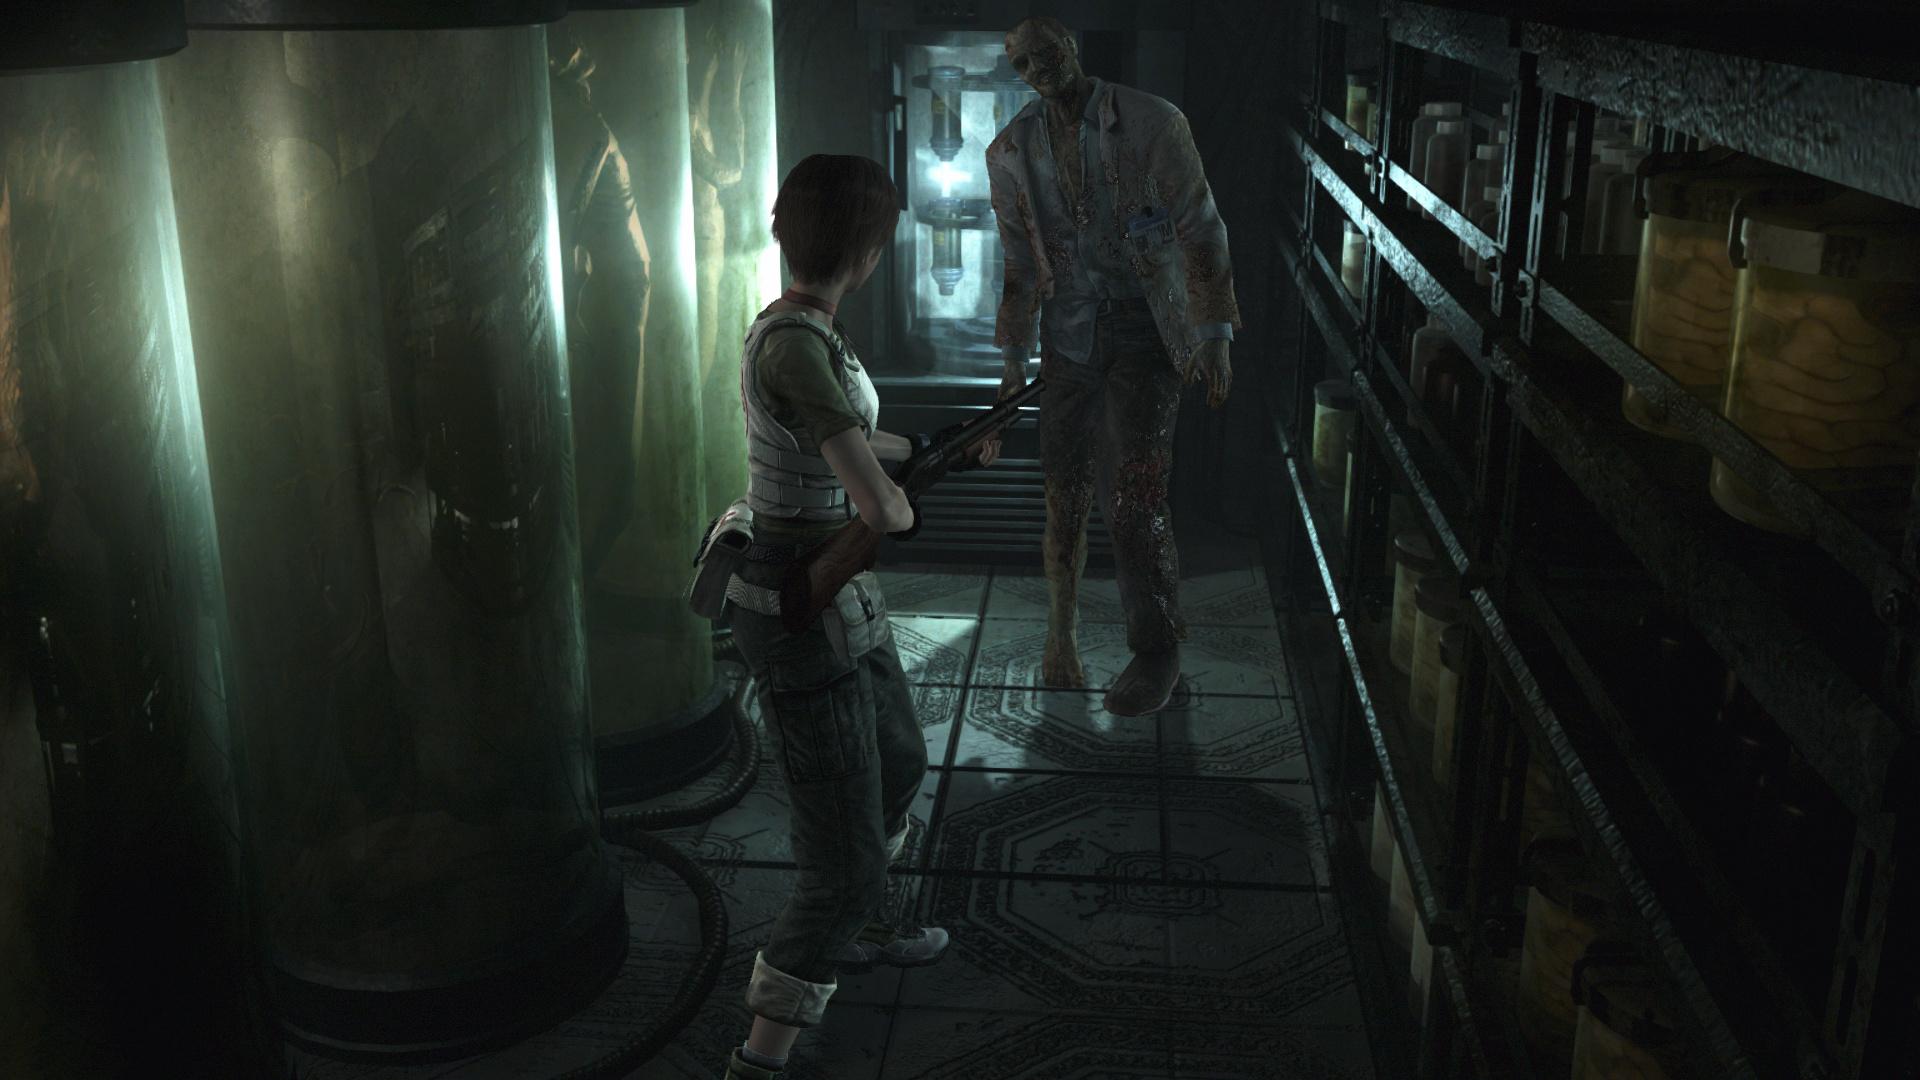 Check out new image from Resident Evil 0 HD Remaster on Horror